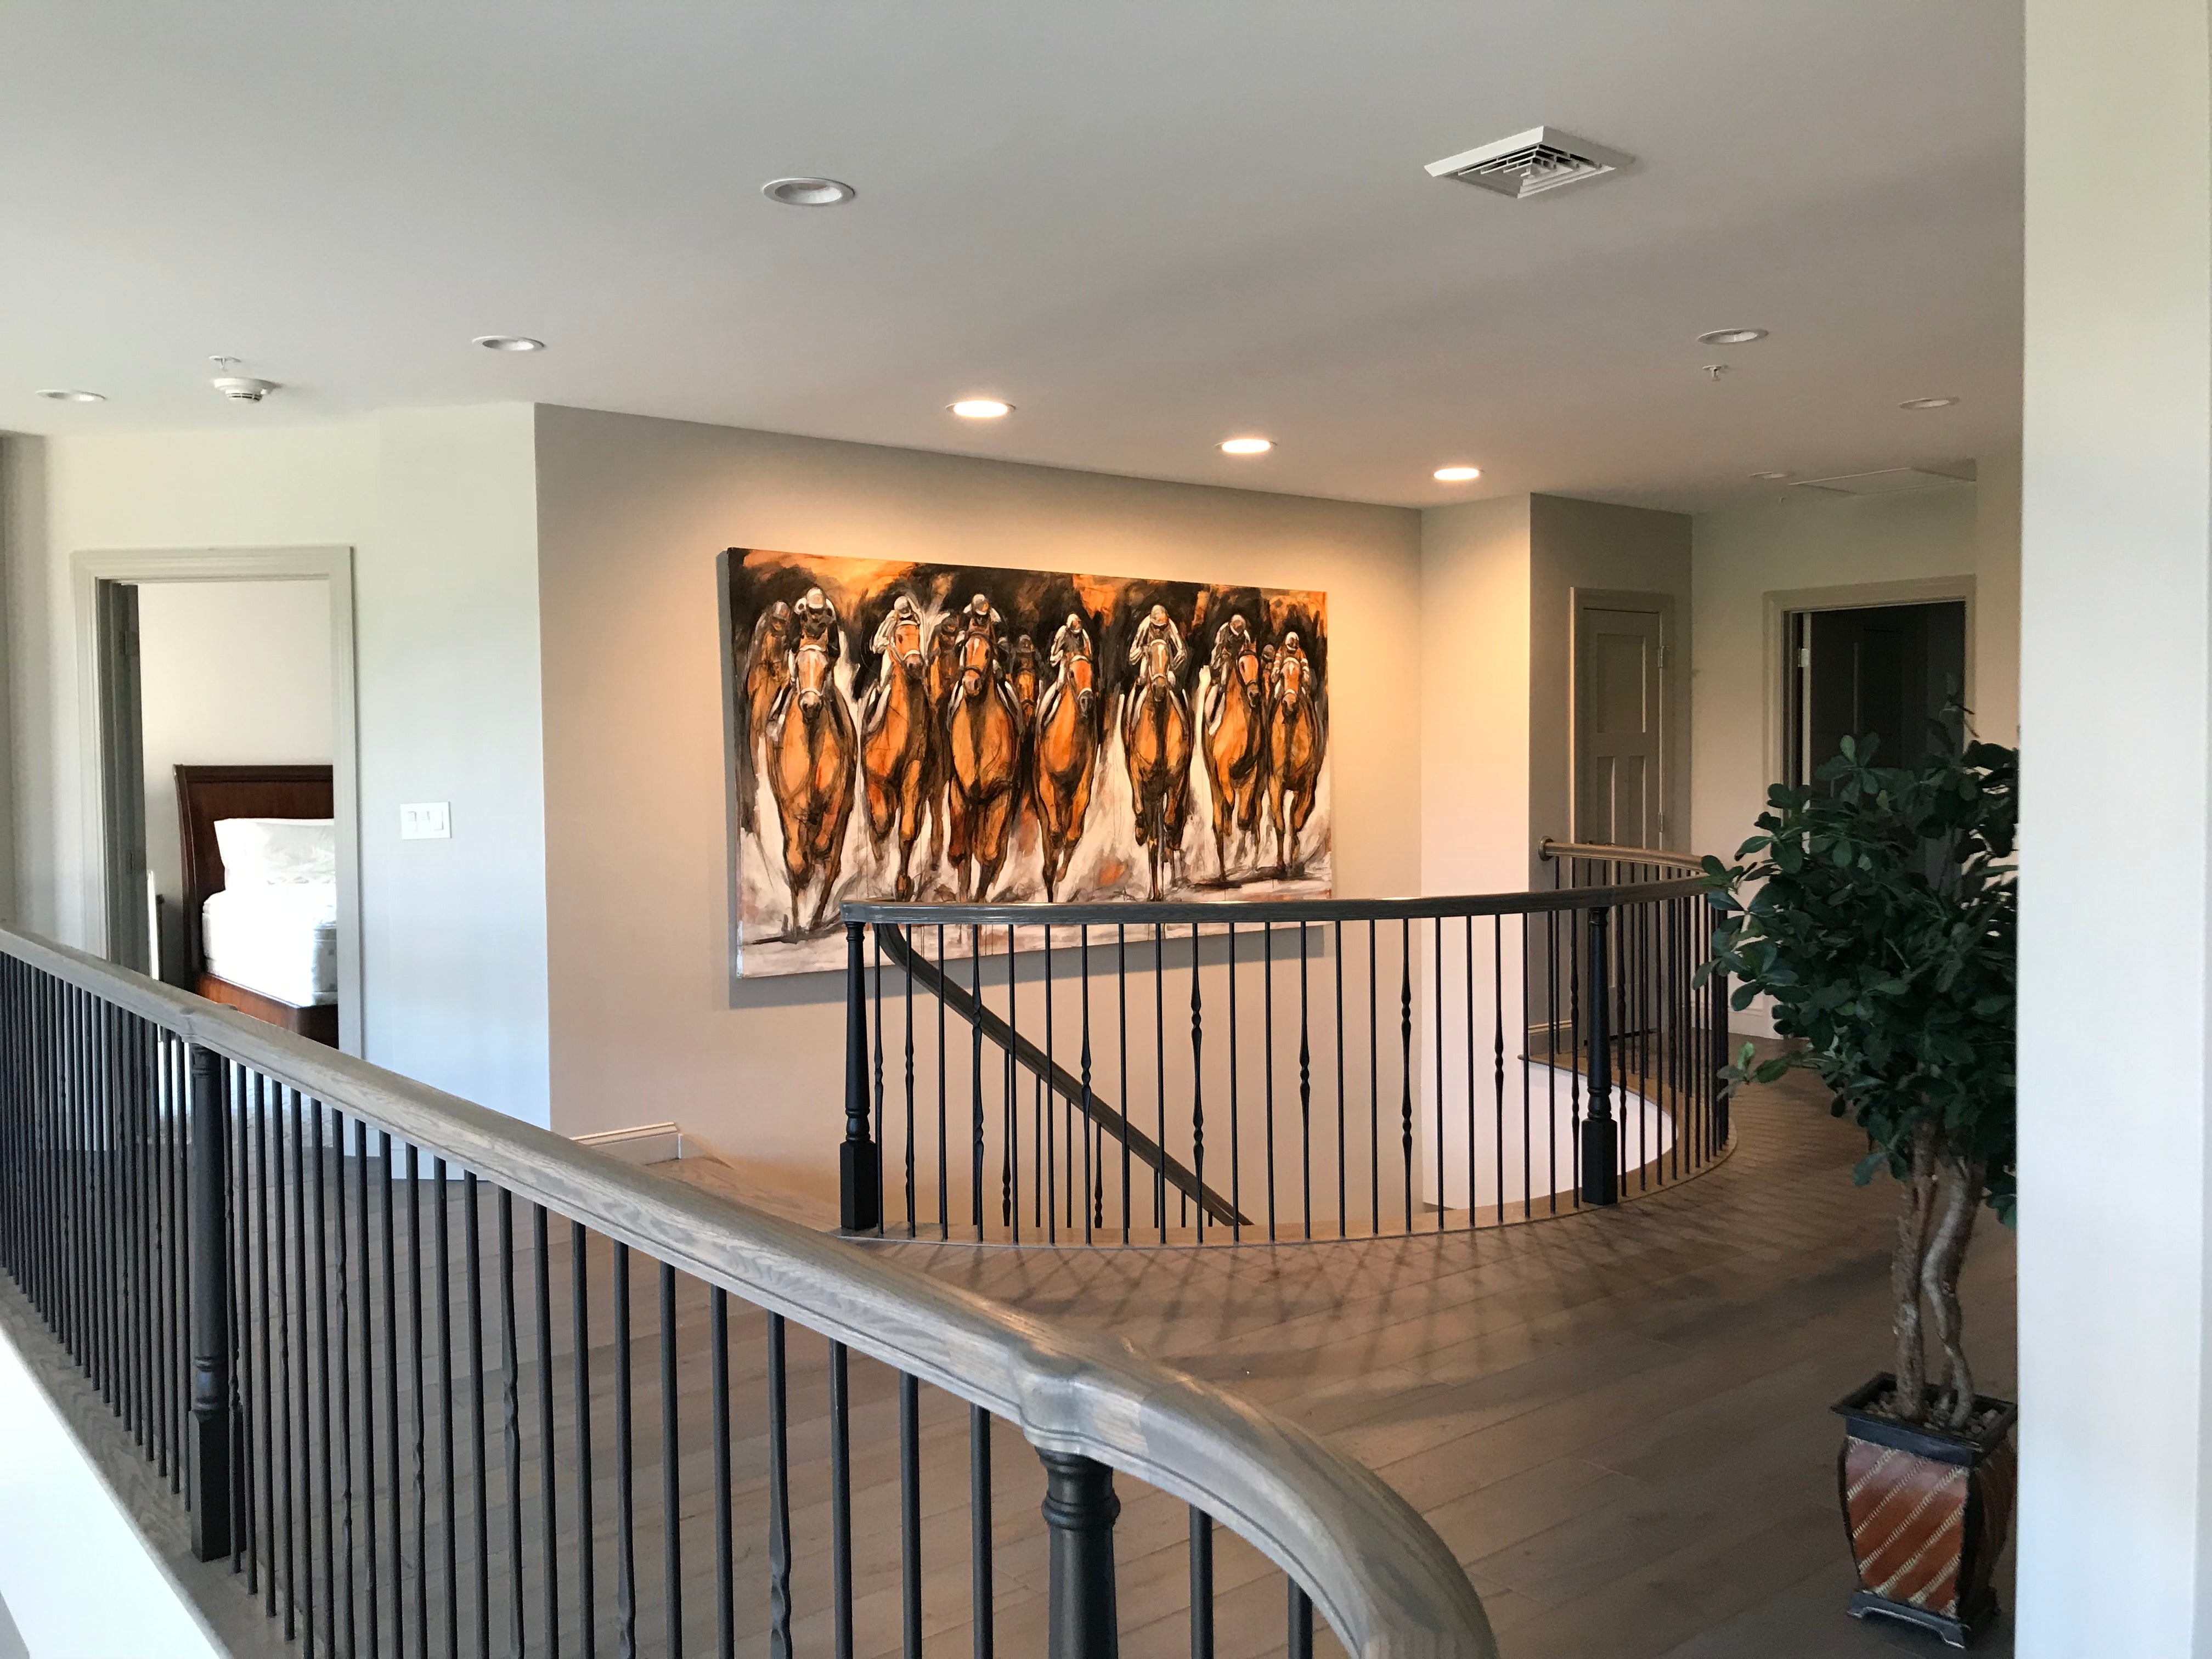 A spacious residential interior with a large painting by Tom Myott hanging prominently on a wall. The painting features a group of powerful, spirited horses captured in warm earth tones, showcasing Myott's characteristic bold brushstrokes. The artwork is a focal point above the staircase landing, flanked by two doors and complemented by a potted plant to the right, giving the modern home a touch of equestrian elegance.